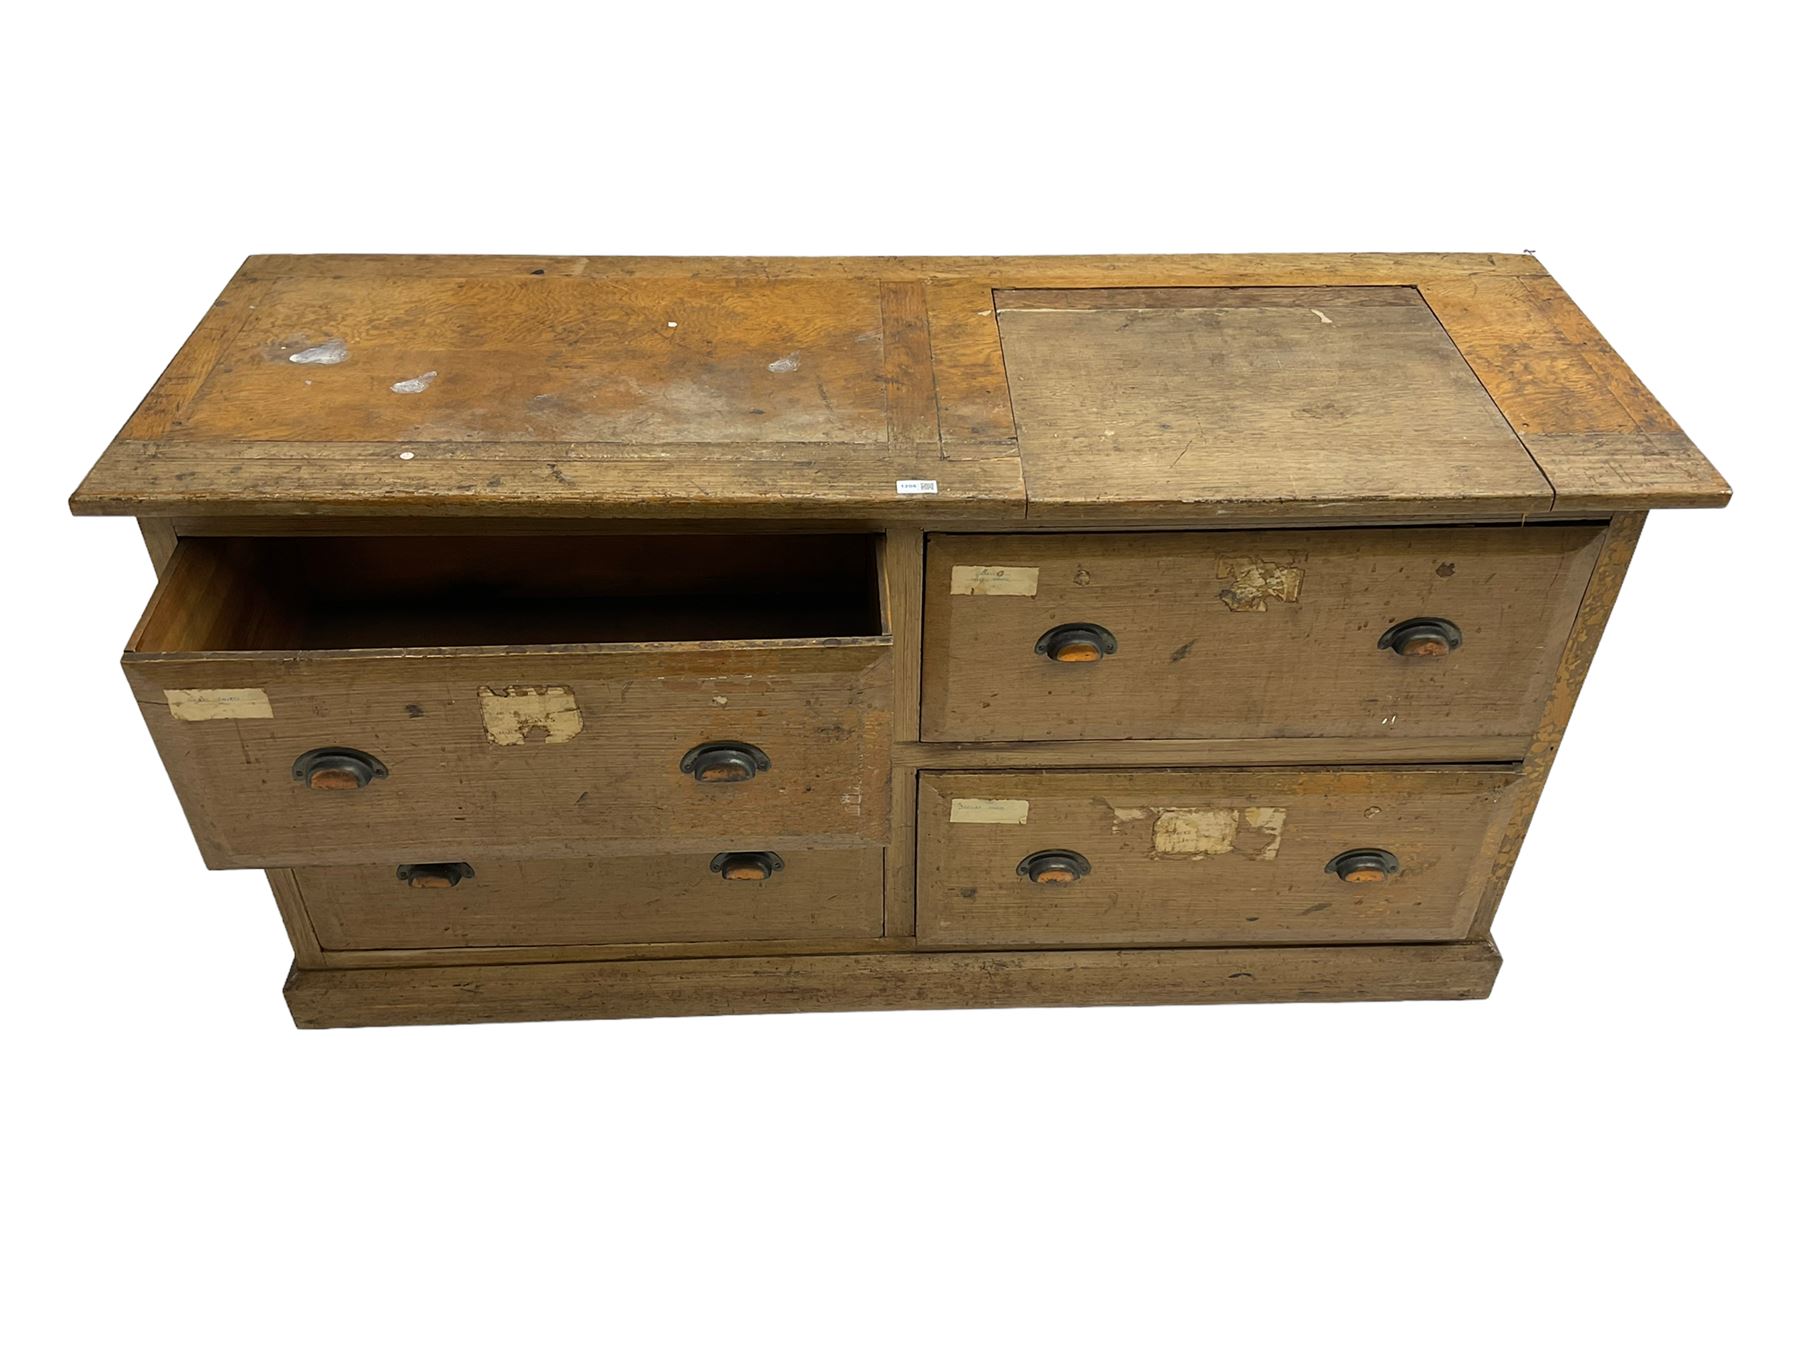 19th century rustic pine chest - Image 5 of 5